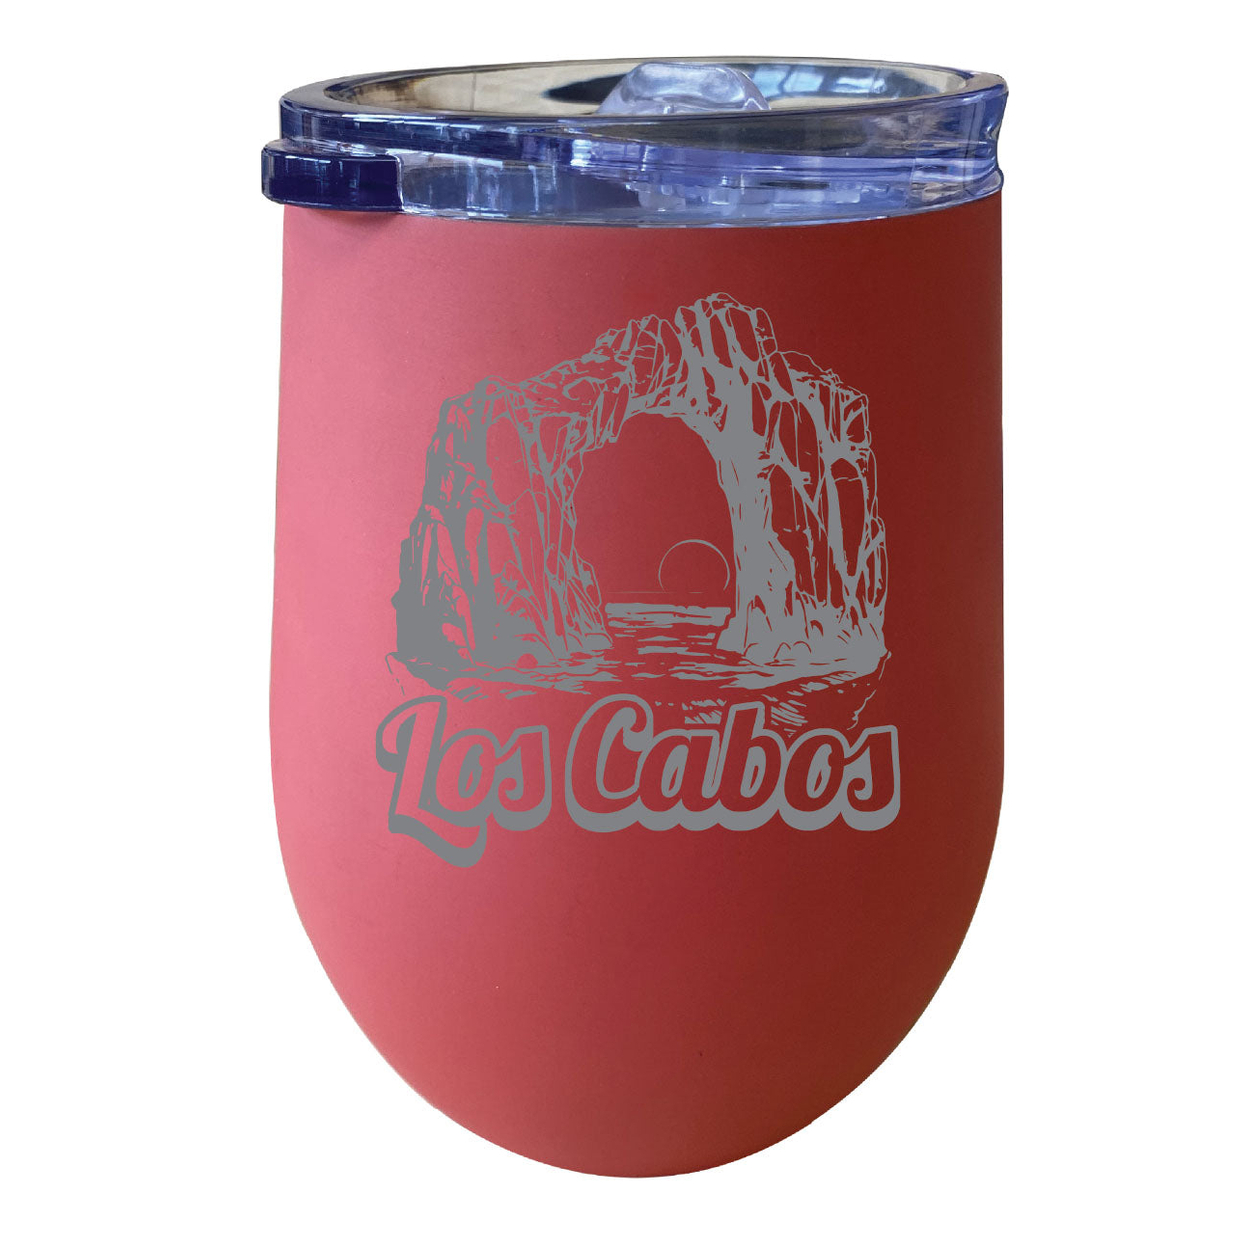 Los Cabos Mexico Souvenir 12 Oz Engraved Insulated Wine Stainless Steel Tumbler - Coral,,2-Pack